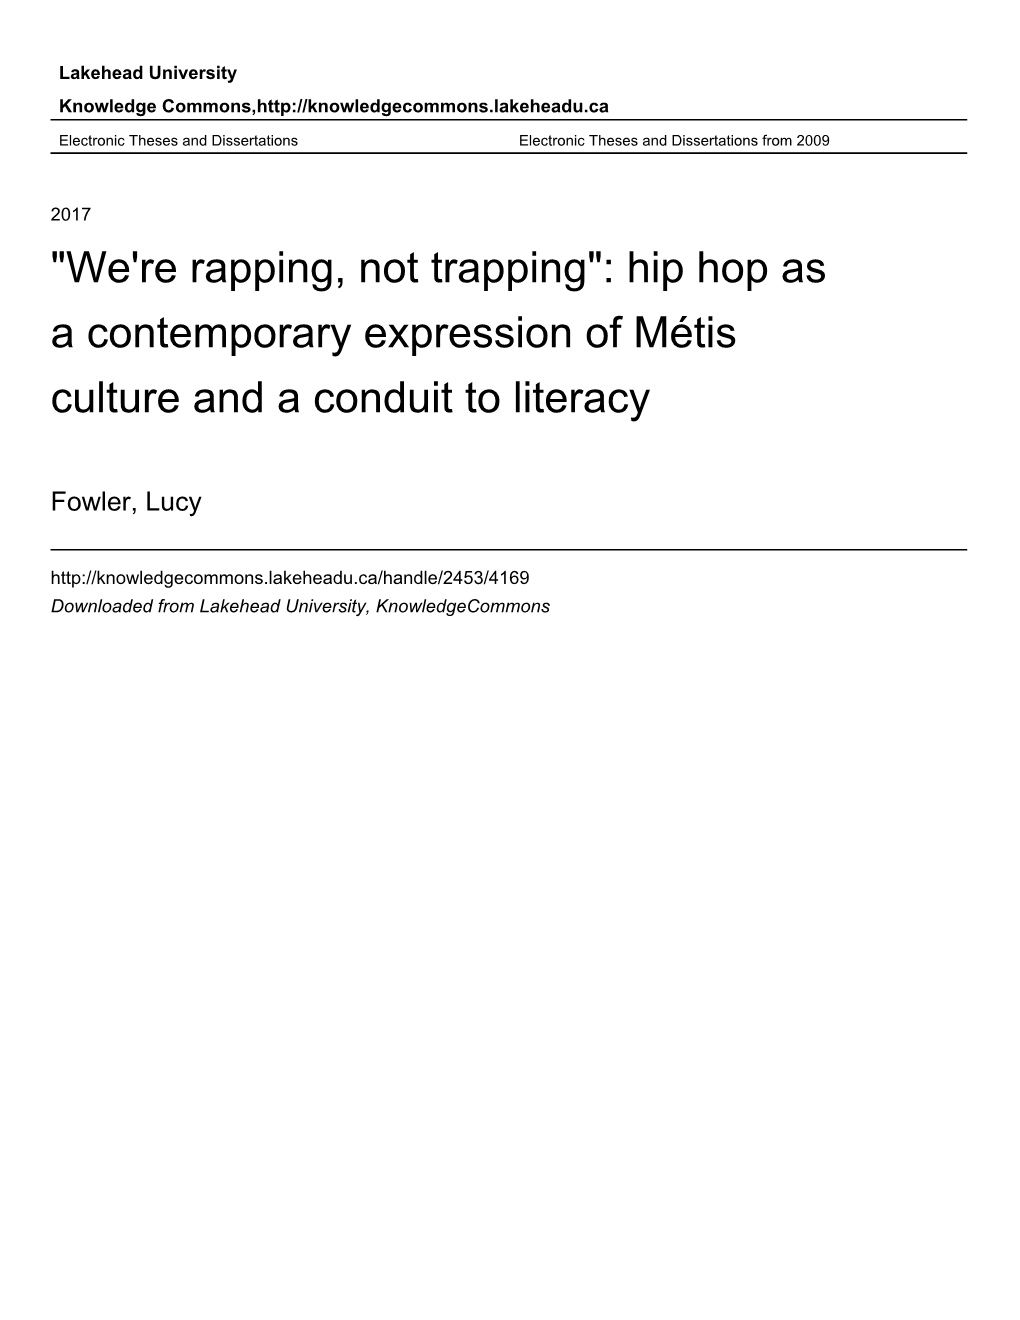 Hip Hop As a Contemporary Expression of Métis Culture and a Conduit to Literacy